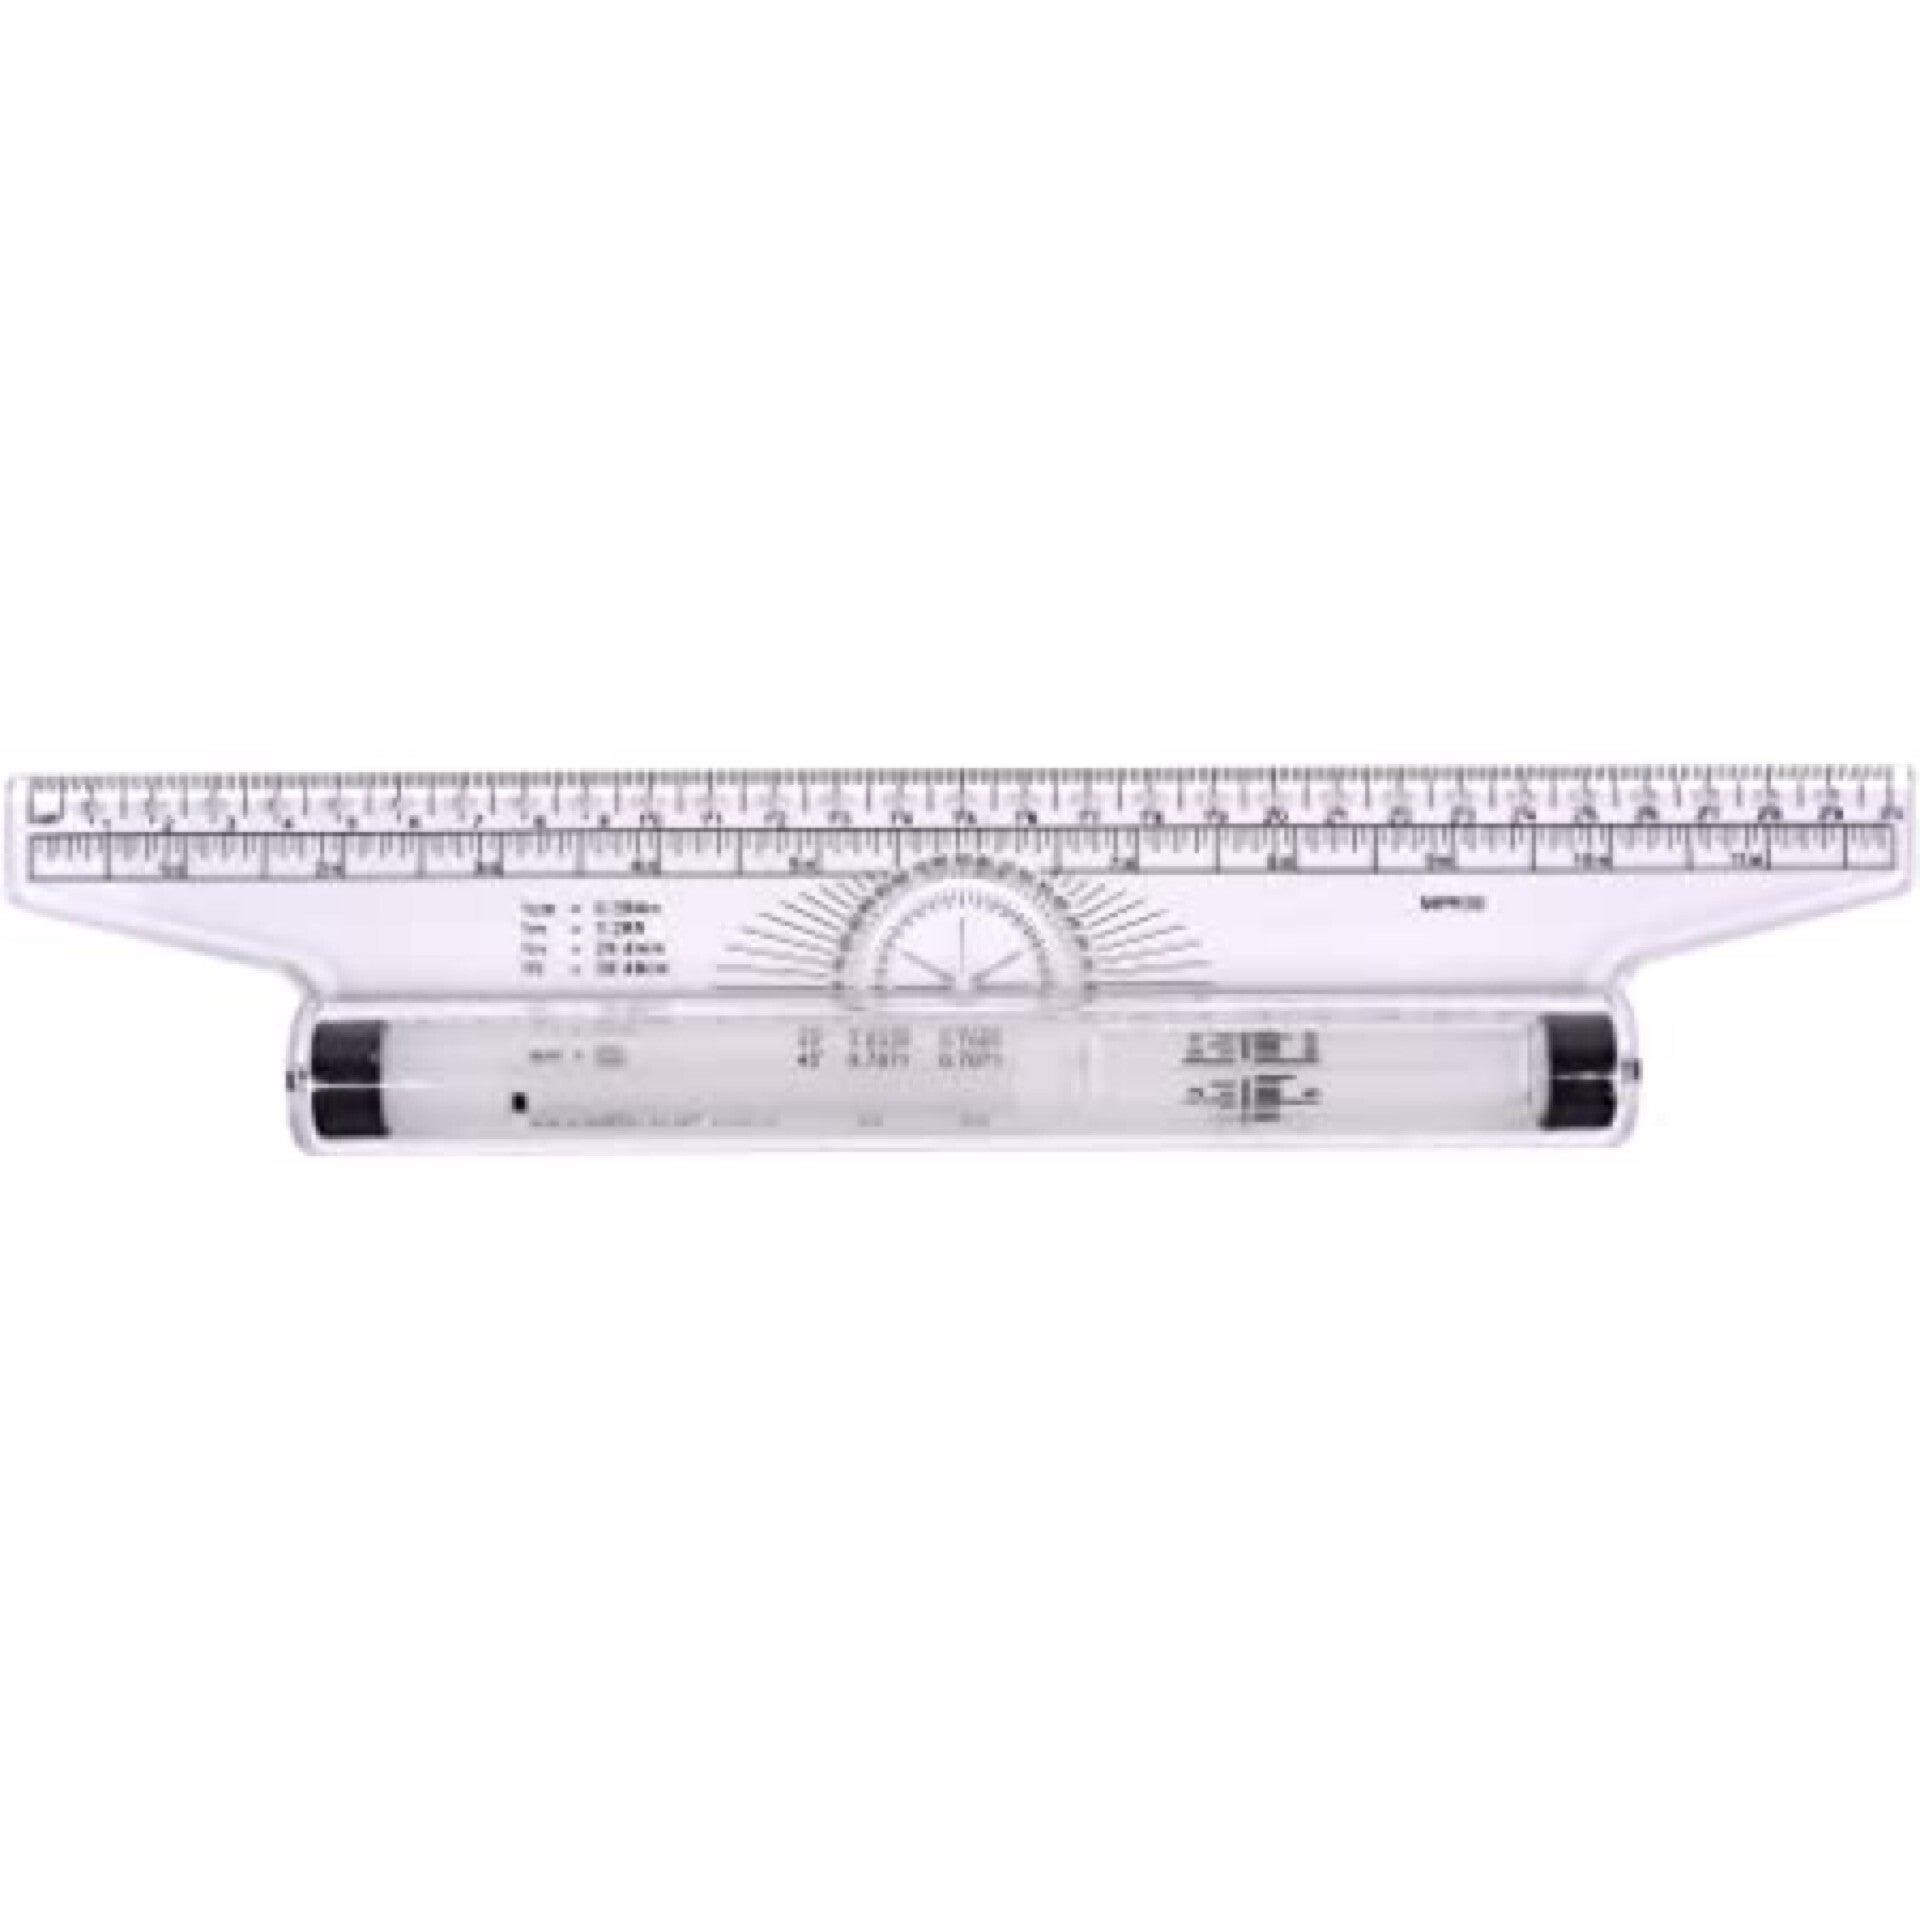 Pacific Arc Professional Parallel Glider Rolling Ruler 14 - Du-All Art &  Drafting Supply